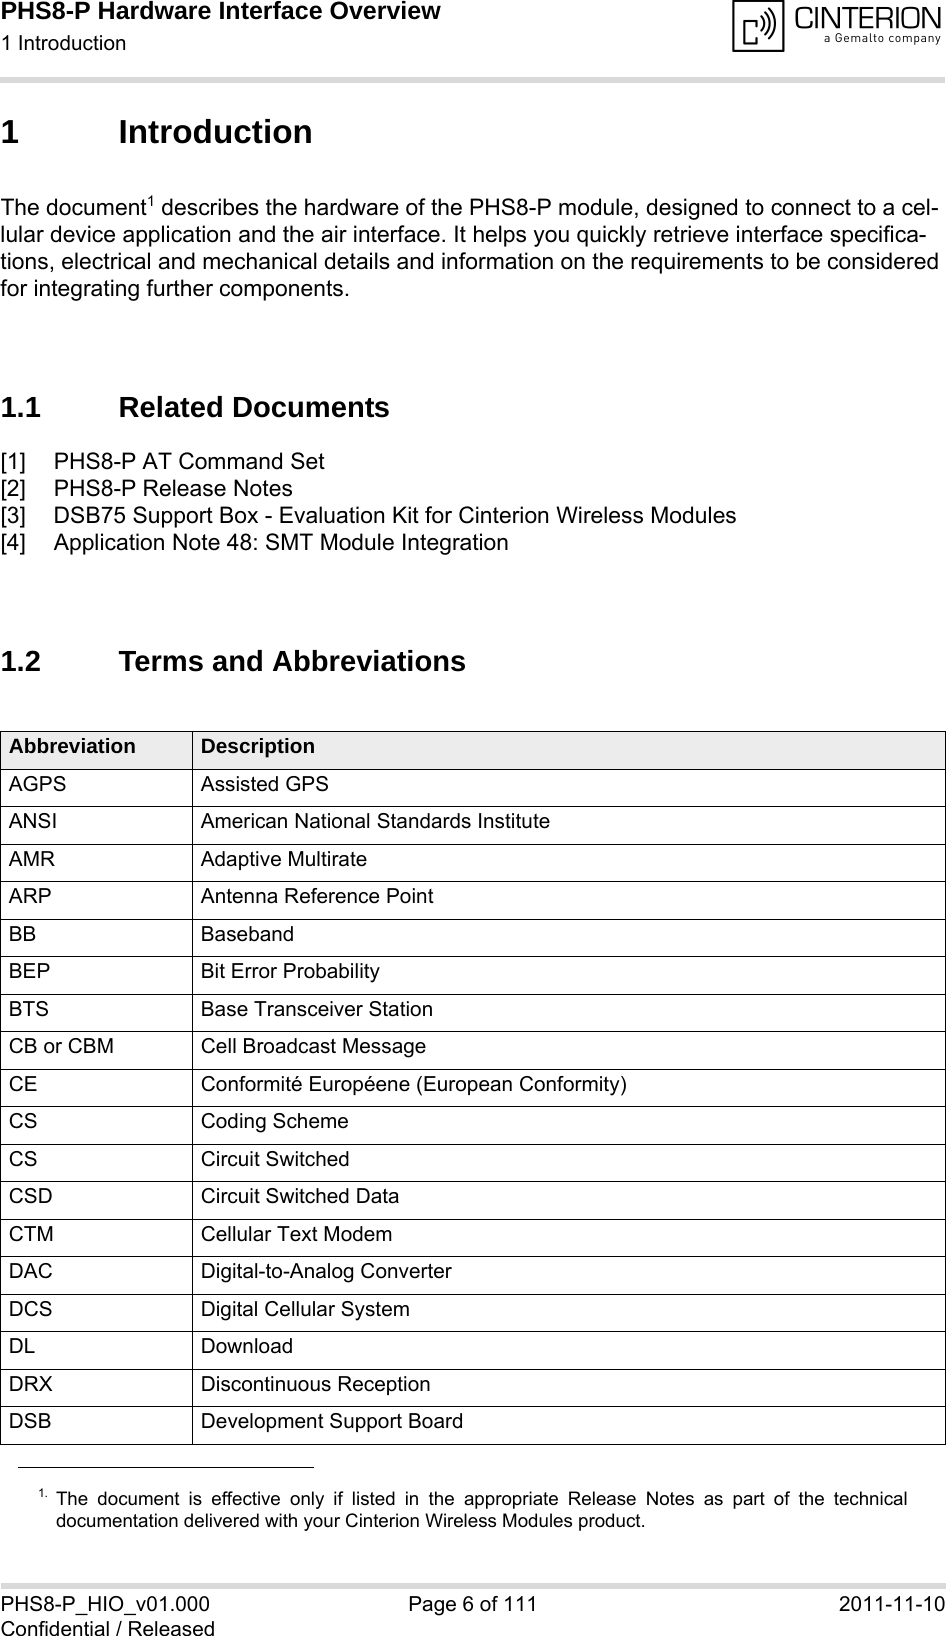 PHS8-P Hardware Interface Overview1 Introduction15PHS8-P_HIO_v01.000 Page 6 of 111 2011-11-10Confidential / Released1 IntroductionThe document1 describes the hardware of the PHS8-P module, designed to connect to a cel-lular device application and the air interface. It helps you quickly retrieve interface specifica-tions, electrical and mechanical details and information on the requirements to be considered for integrating further components.1.1 Related Documents[1] PHS8-P AT Command Set[2] PHS8-P Release Notes[3] DSB75 Support Box - Evaluation Kit for Cinterion Wireless Modules[4] Application Note 48: SMT Module Integration1.2 Terms and Abbreviations1. The document is effective only if listed in the appropriate Release Notes as part of the technicaldocumentation delivered with your Cinterion Wireless Modules product.Abbreviation DescriptionAGPS Assisted GPSANSI American National Standards InstituteAMR Adaptive MultirateARP Antenna Reference PointBB BasebandBEP Bit Error ProbabilityBTS Base Transceiver StationCB or CBM Cell Broadcast MessageCE Conformité Européene (European Conformity)CS Coding SchemeCS Circuit SwitchedCSD Circuit Switched DataCTM Cellular Text ModemDAC Digital-to-Analog ConverterDCS Digital Cellular SystemDL DownloadDRX Discontinuous ReceptionDSB Development Support Board